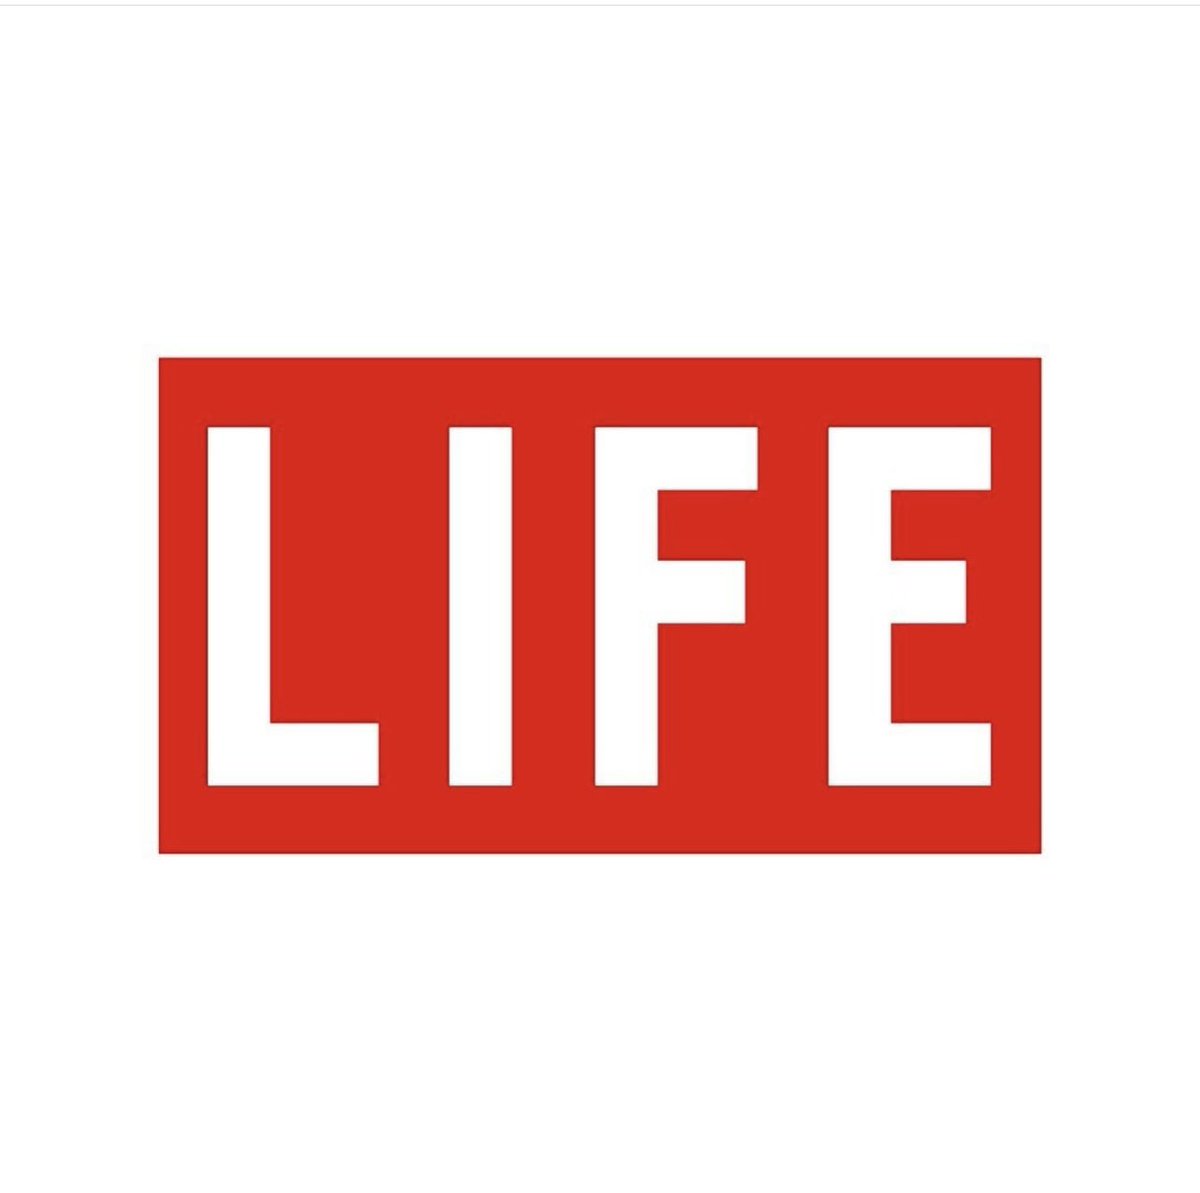 We're thrilled to announce that Bedford Media will bring @LIFE Magazine back in an agreement with Dotdash Meredith. We believe LIFE is an iconic brand that occupies a unique space at the intersection of influential voices and visionary storytellers. prn.to/3TElsvc